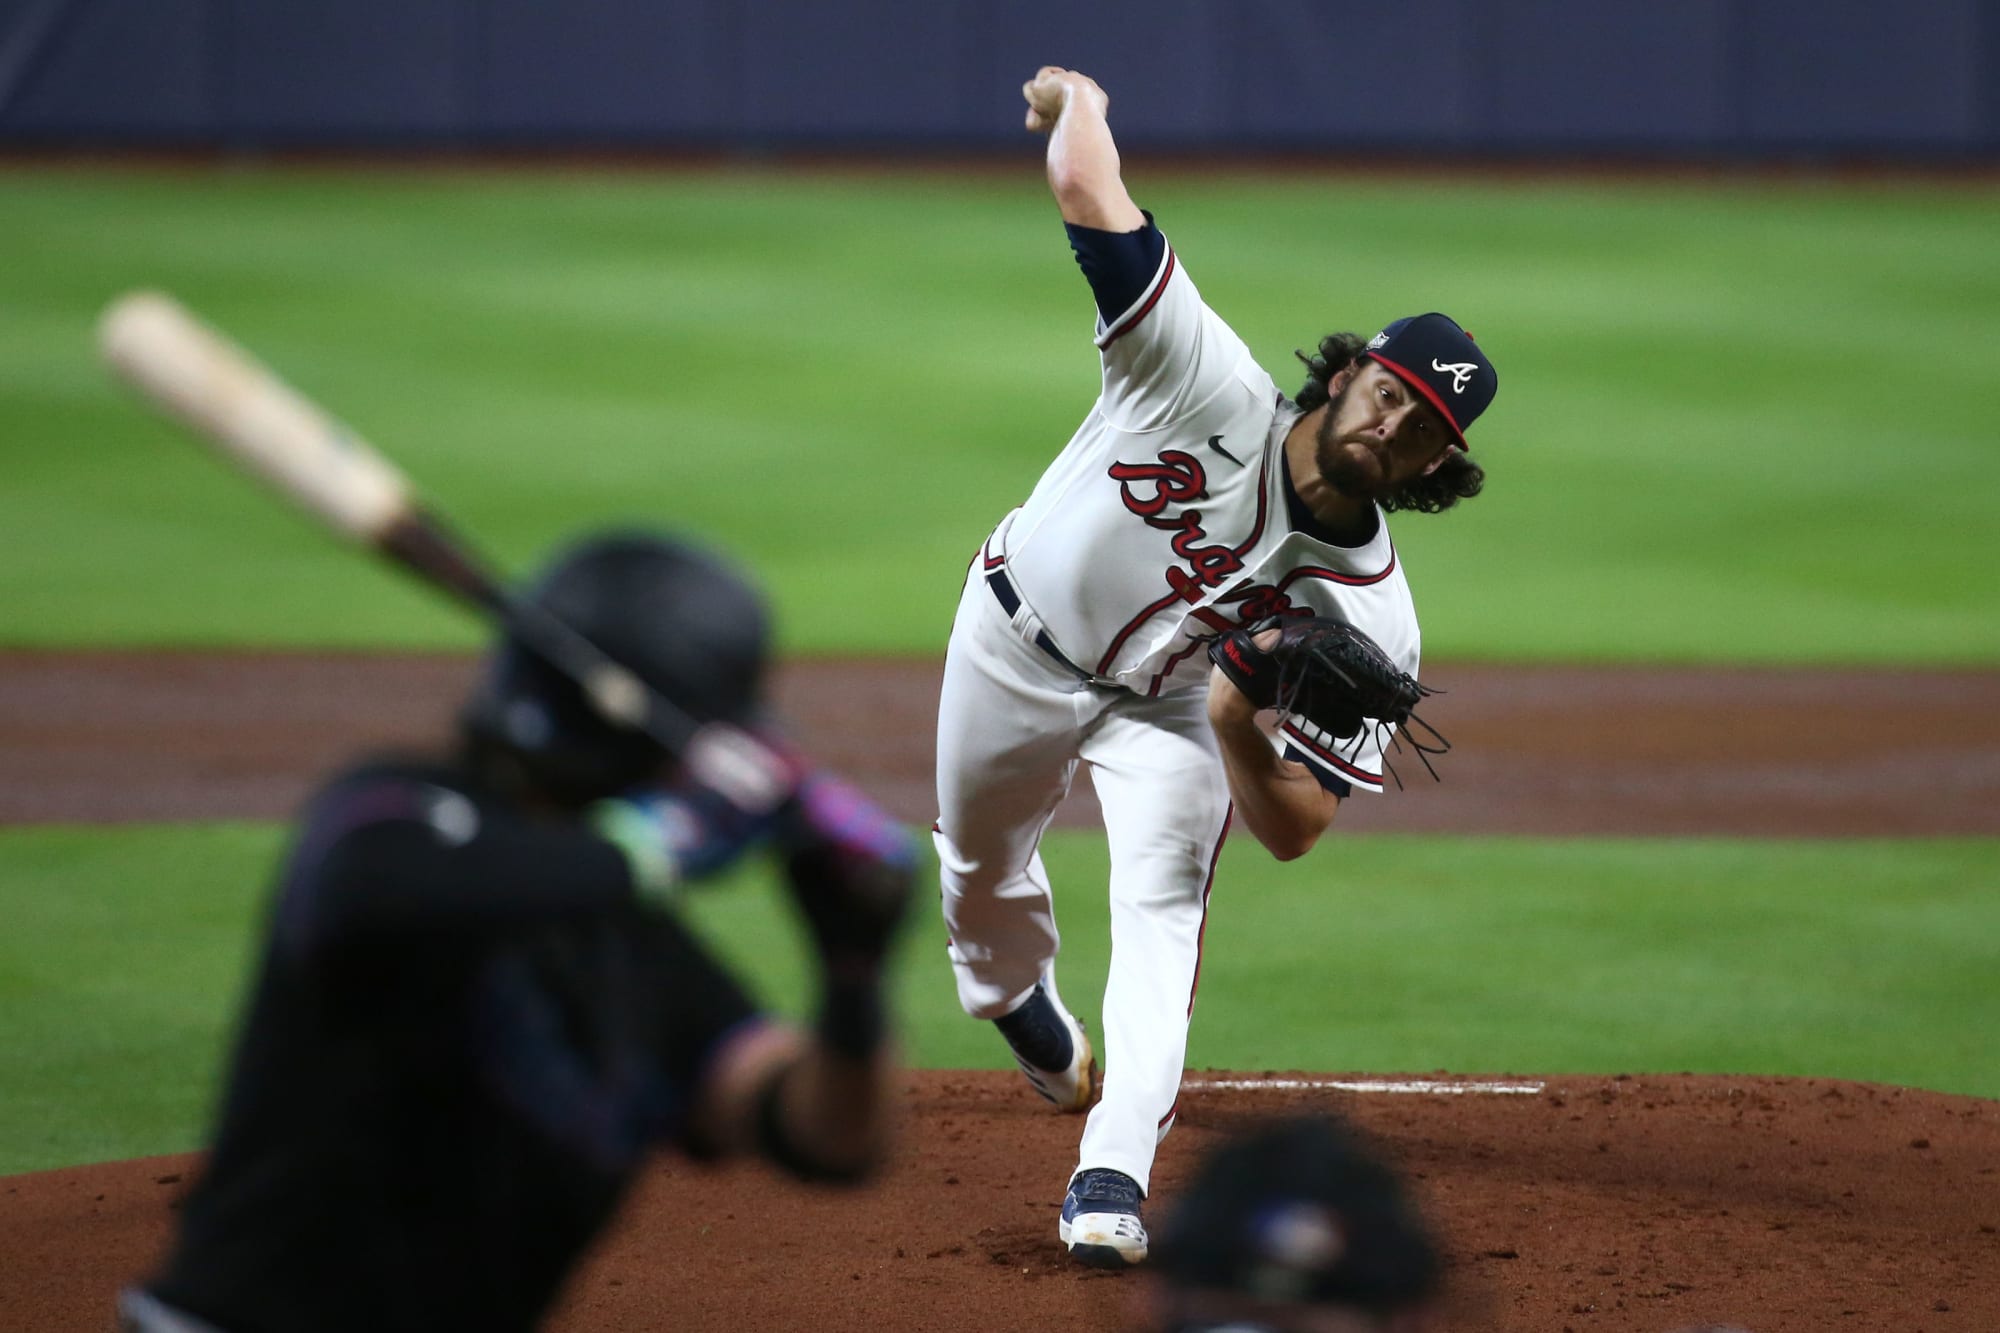 The Atlanta Braves and pitchers who have to hit